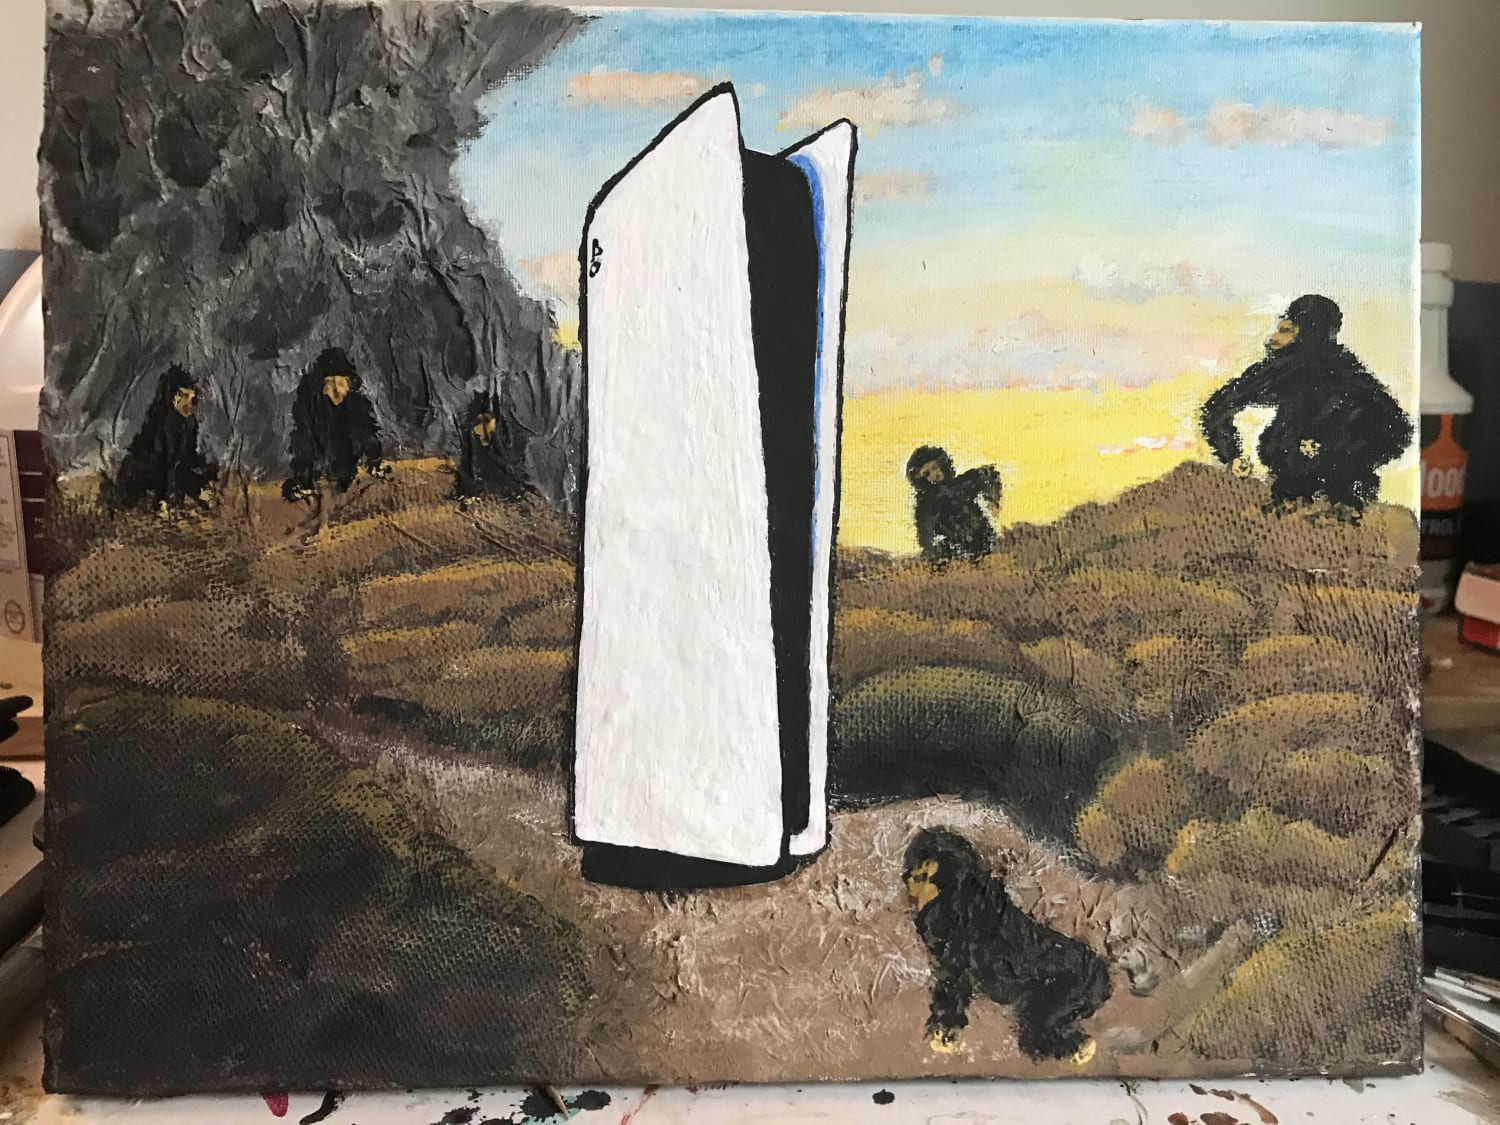 2020 PlayStation Odyssey painting (link in description)